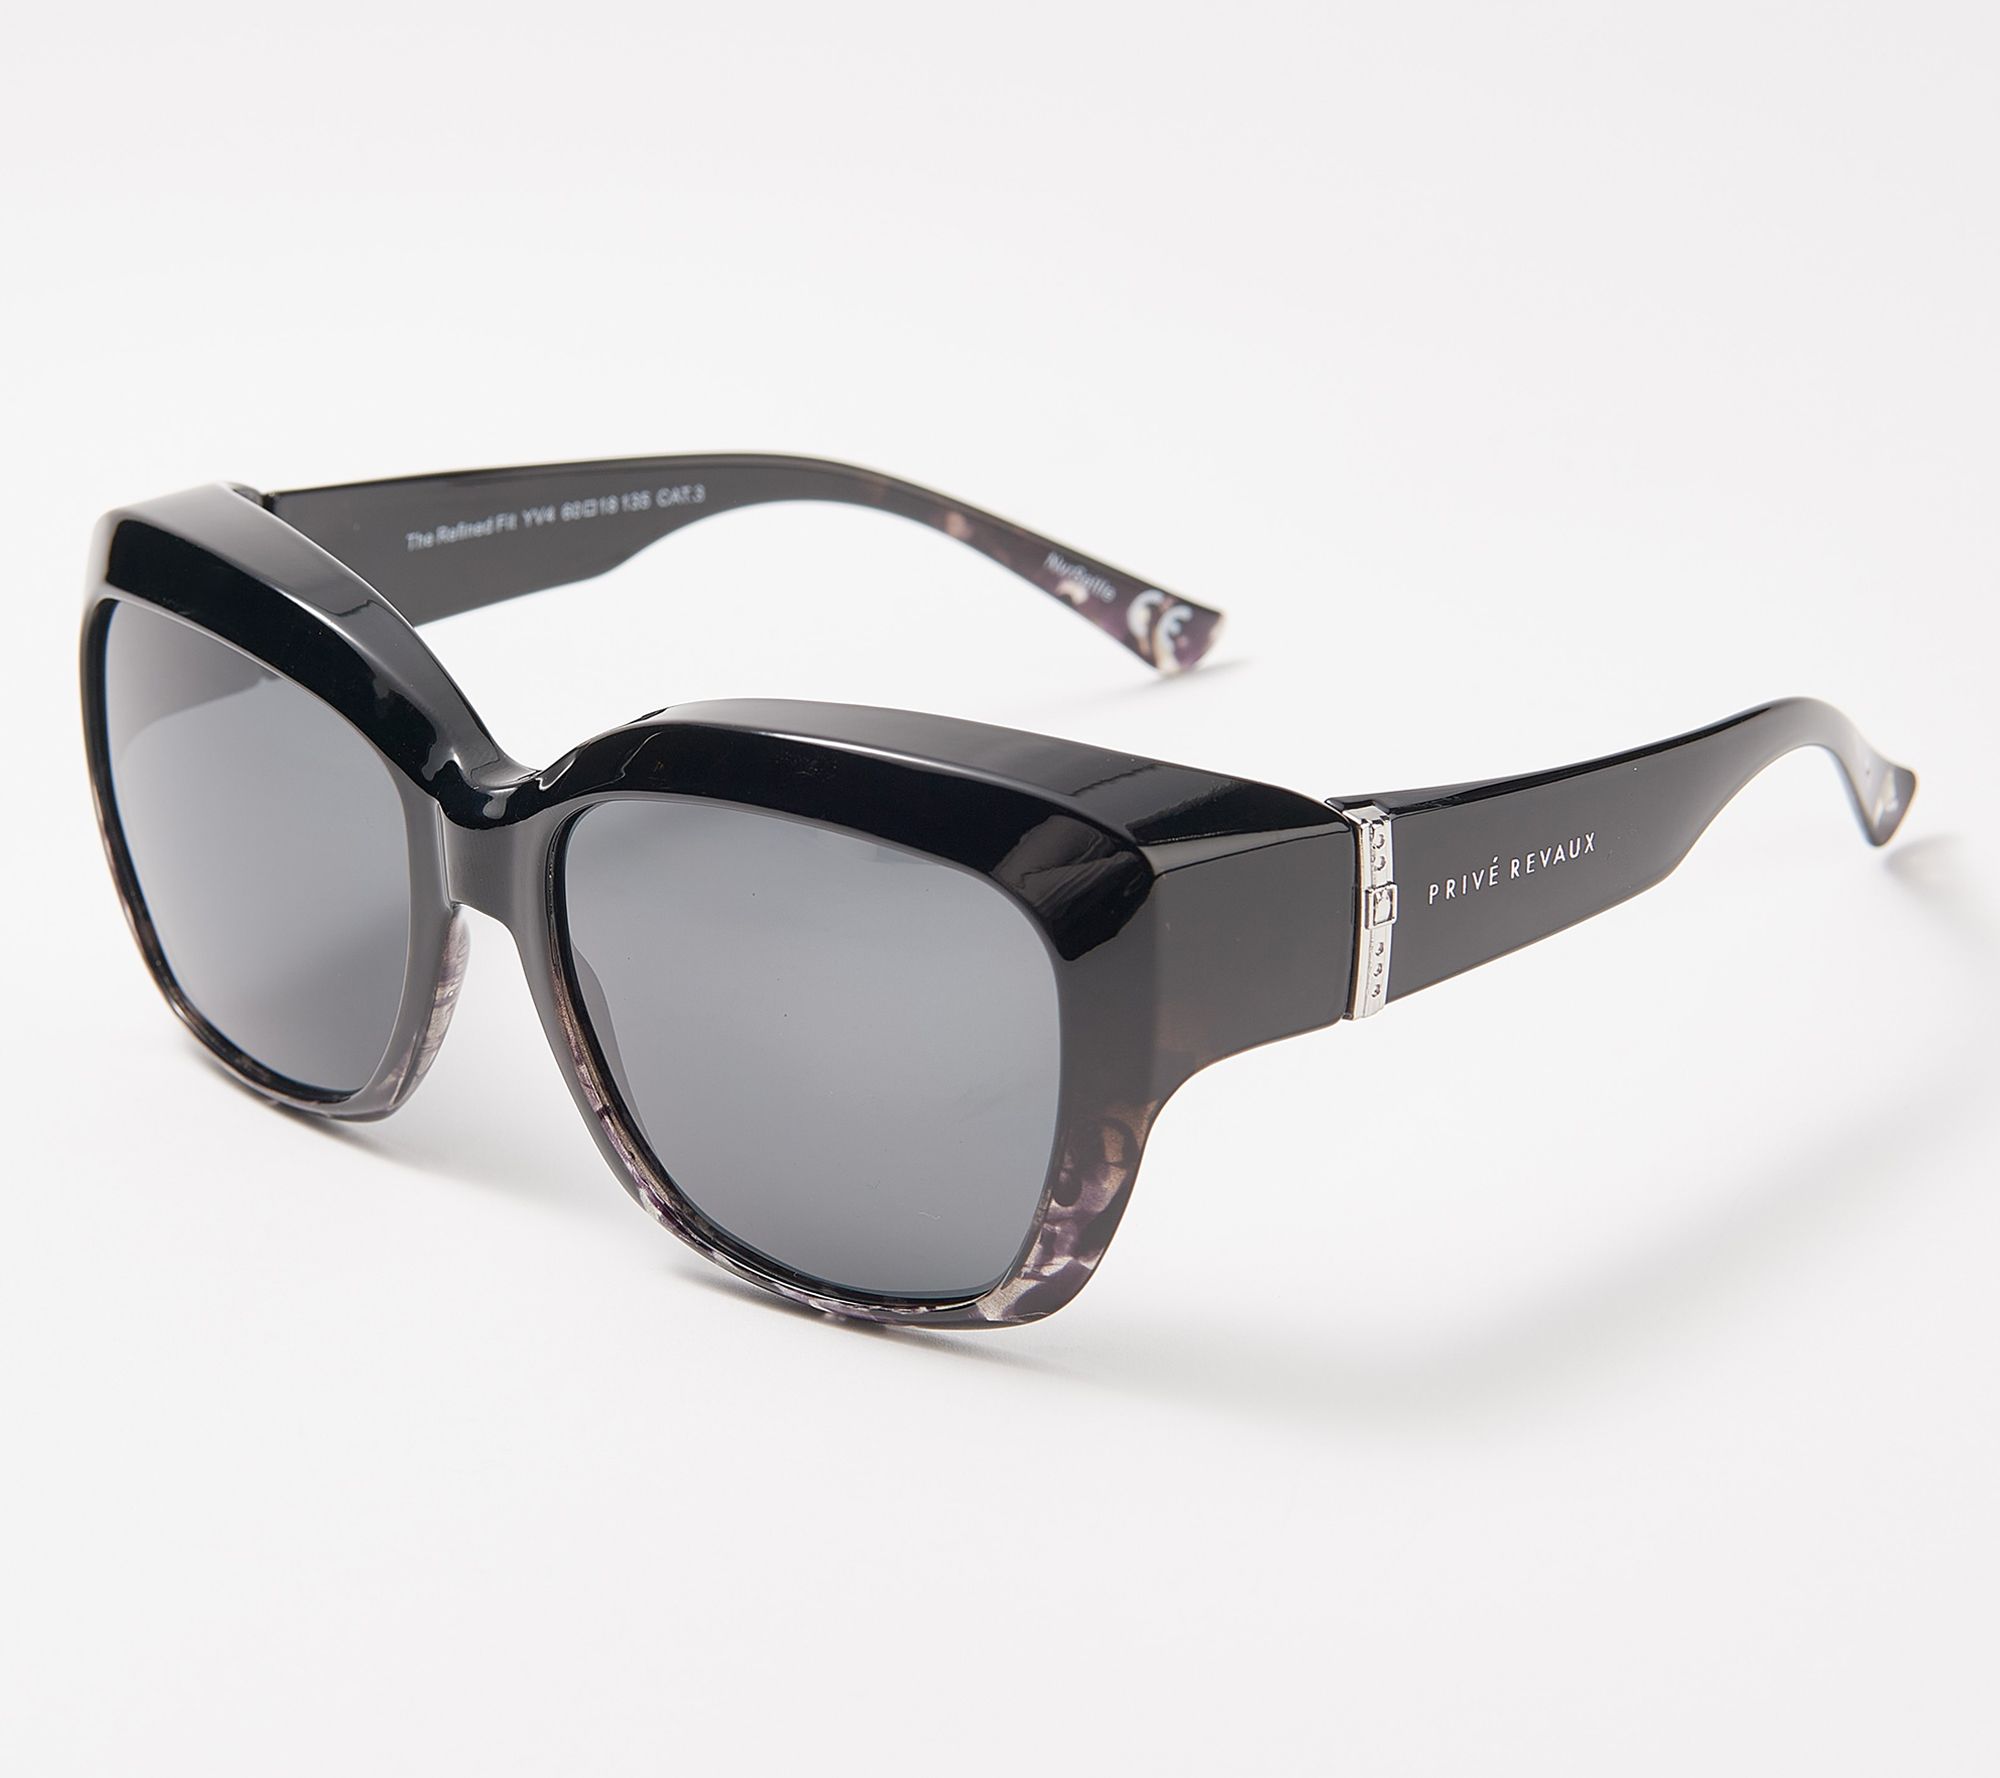 Prive Revaux The Refined Fit Polarized Fitover Sunglasses